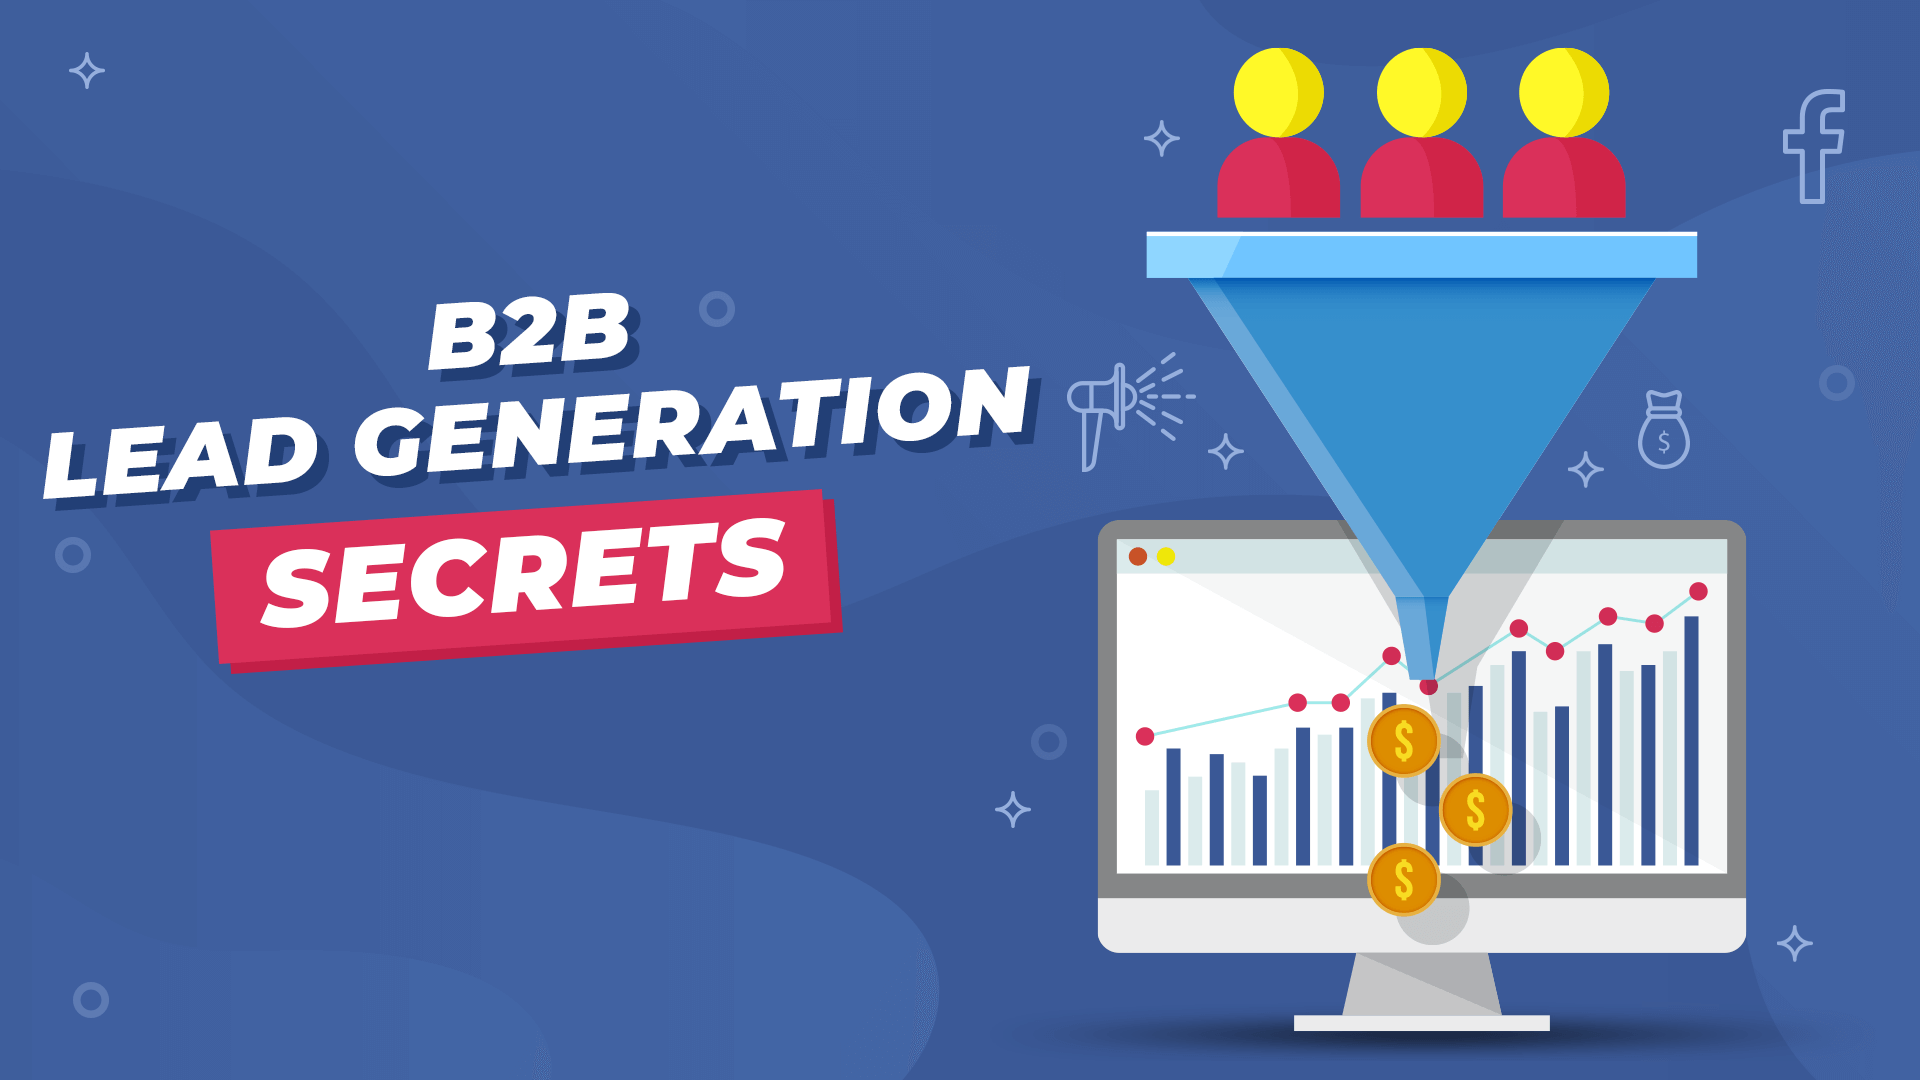 B2B Lead Generation: 5 Ways To Get More Leads And Improve Conversion Rates